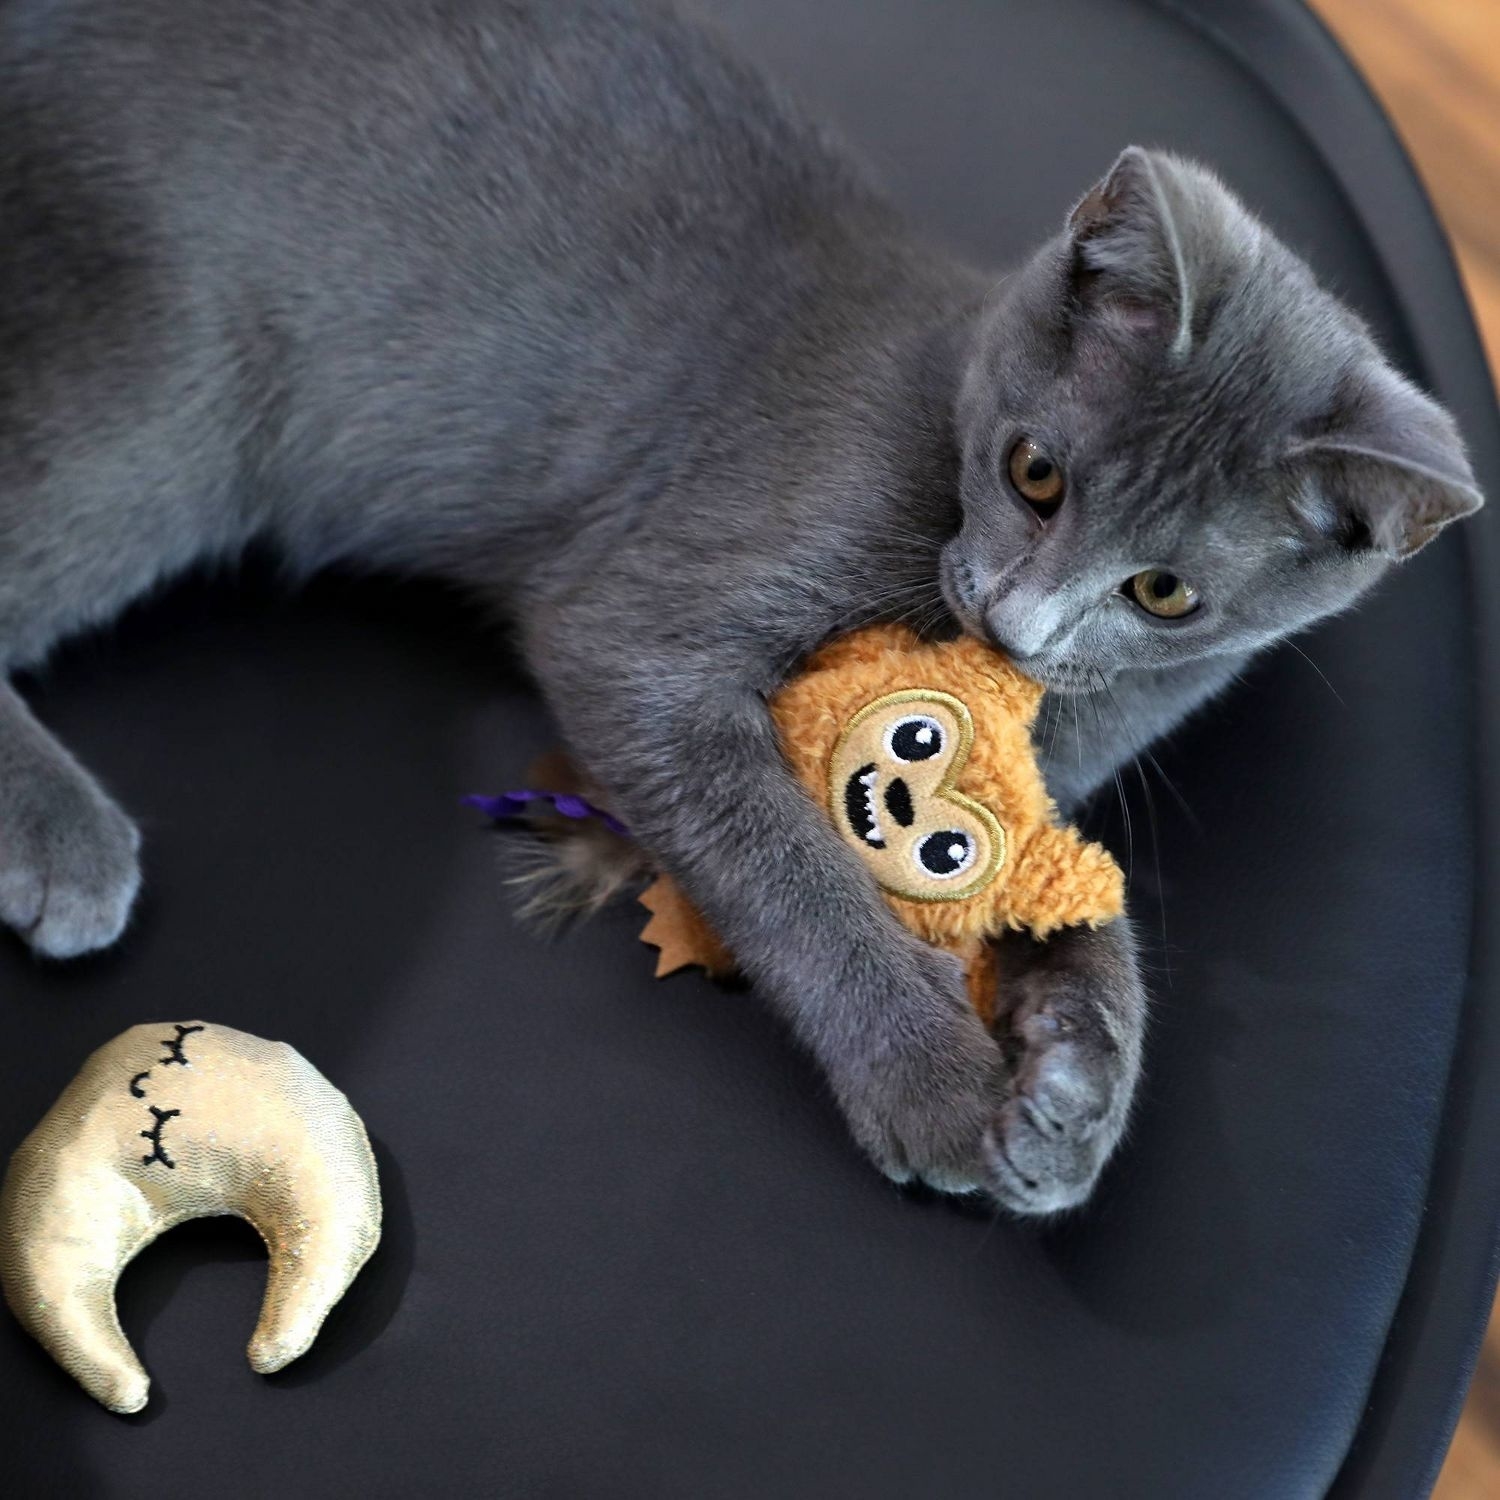 A cat playing with the toys, one shaped like a werewolf, one shaped like a crescent moon